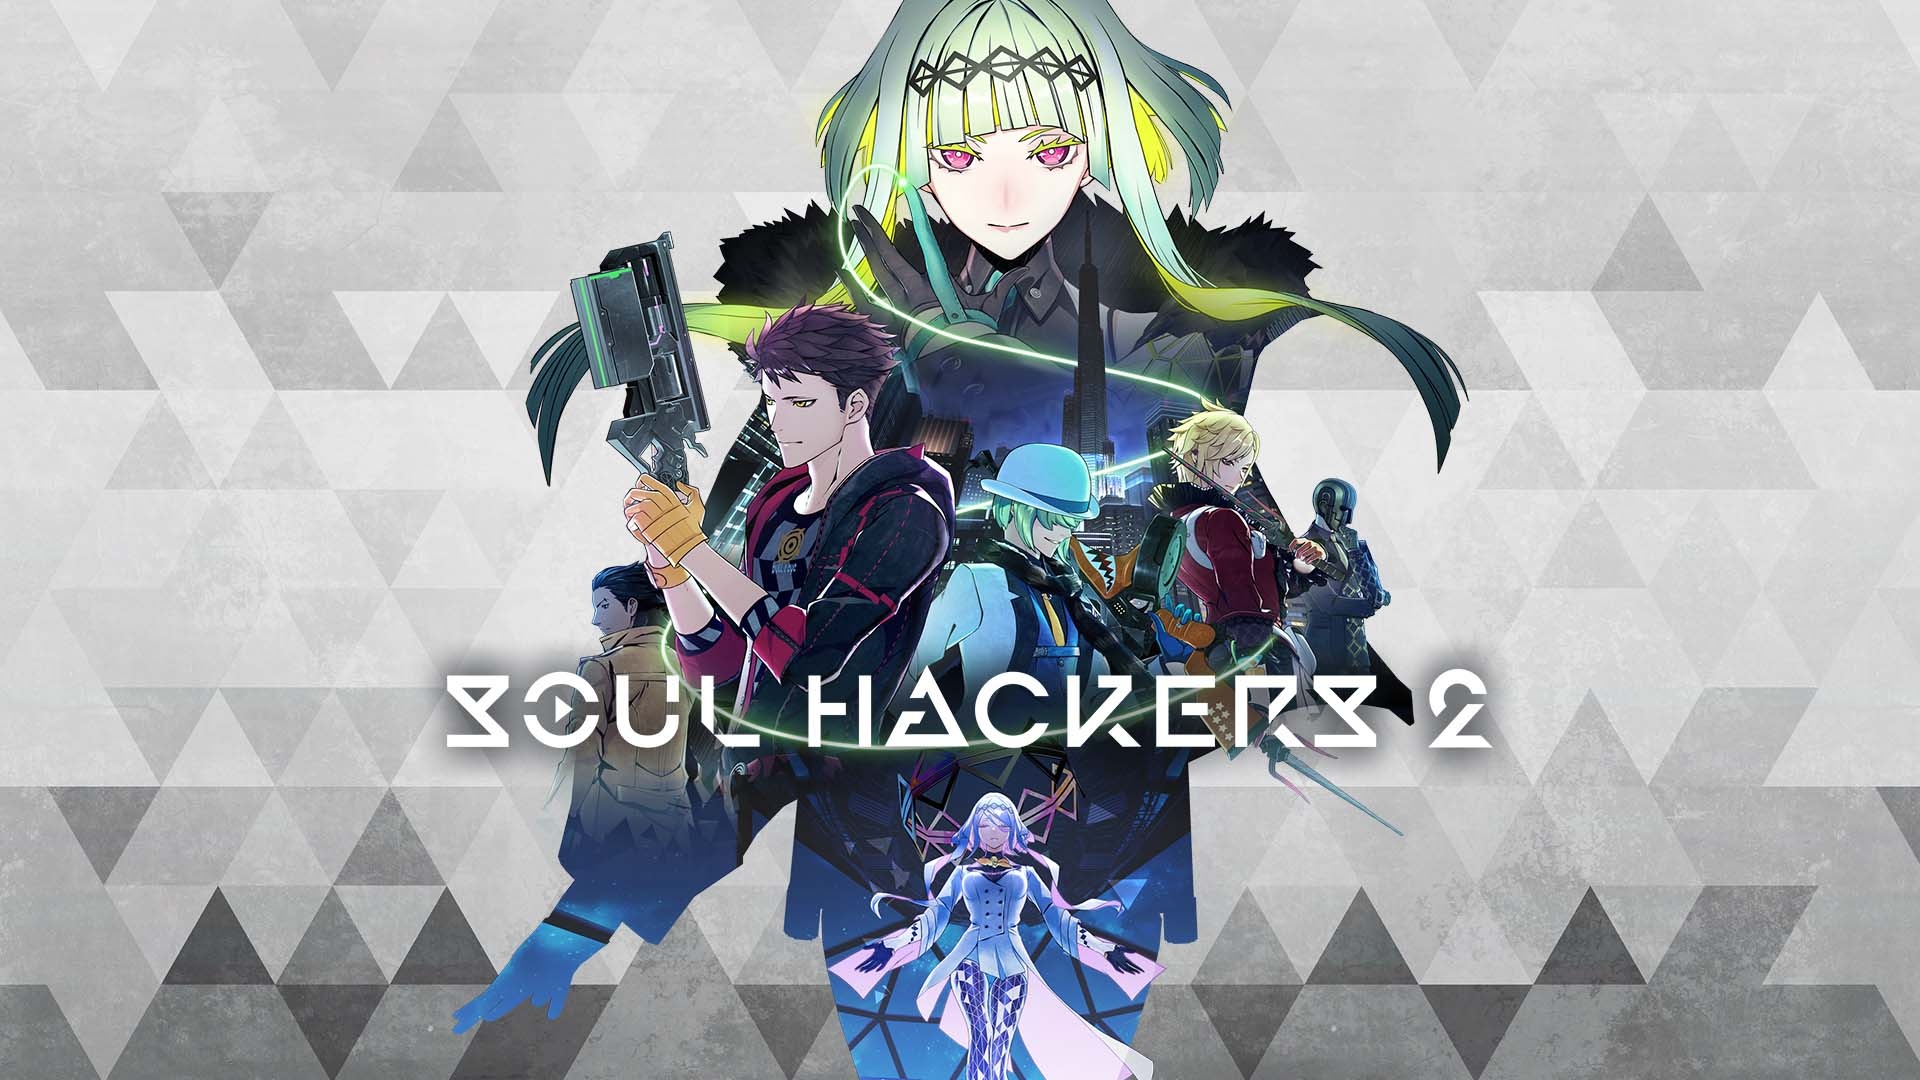 Video For Soul Hackers 2 Launches Today! 3 Reasons Why You Should Give It a Look